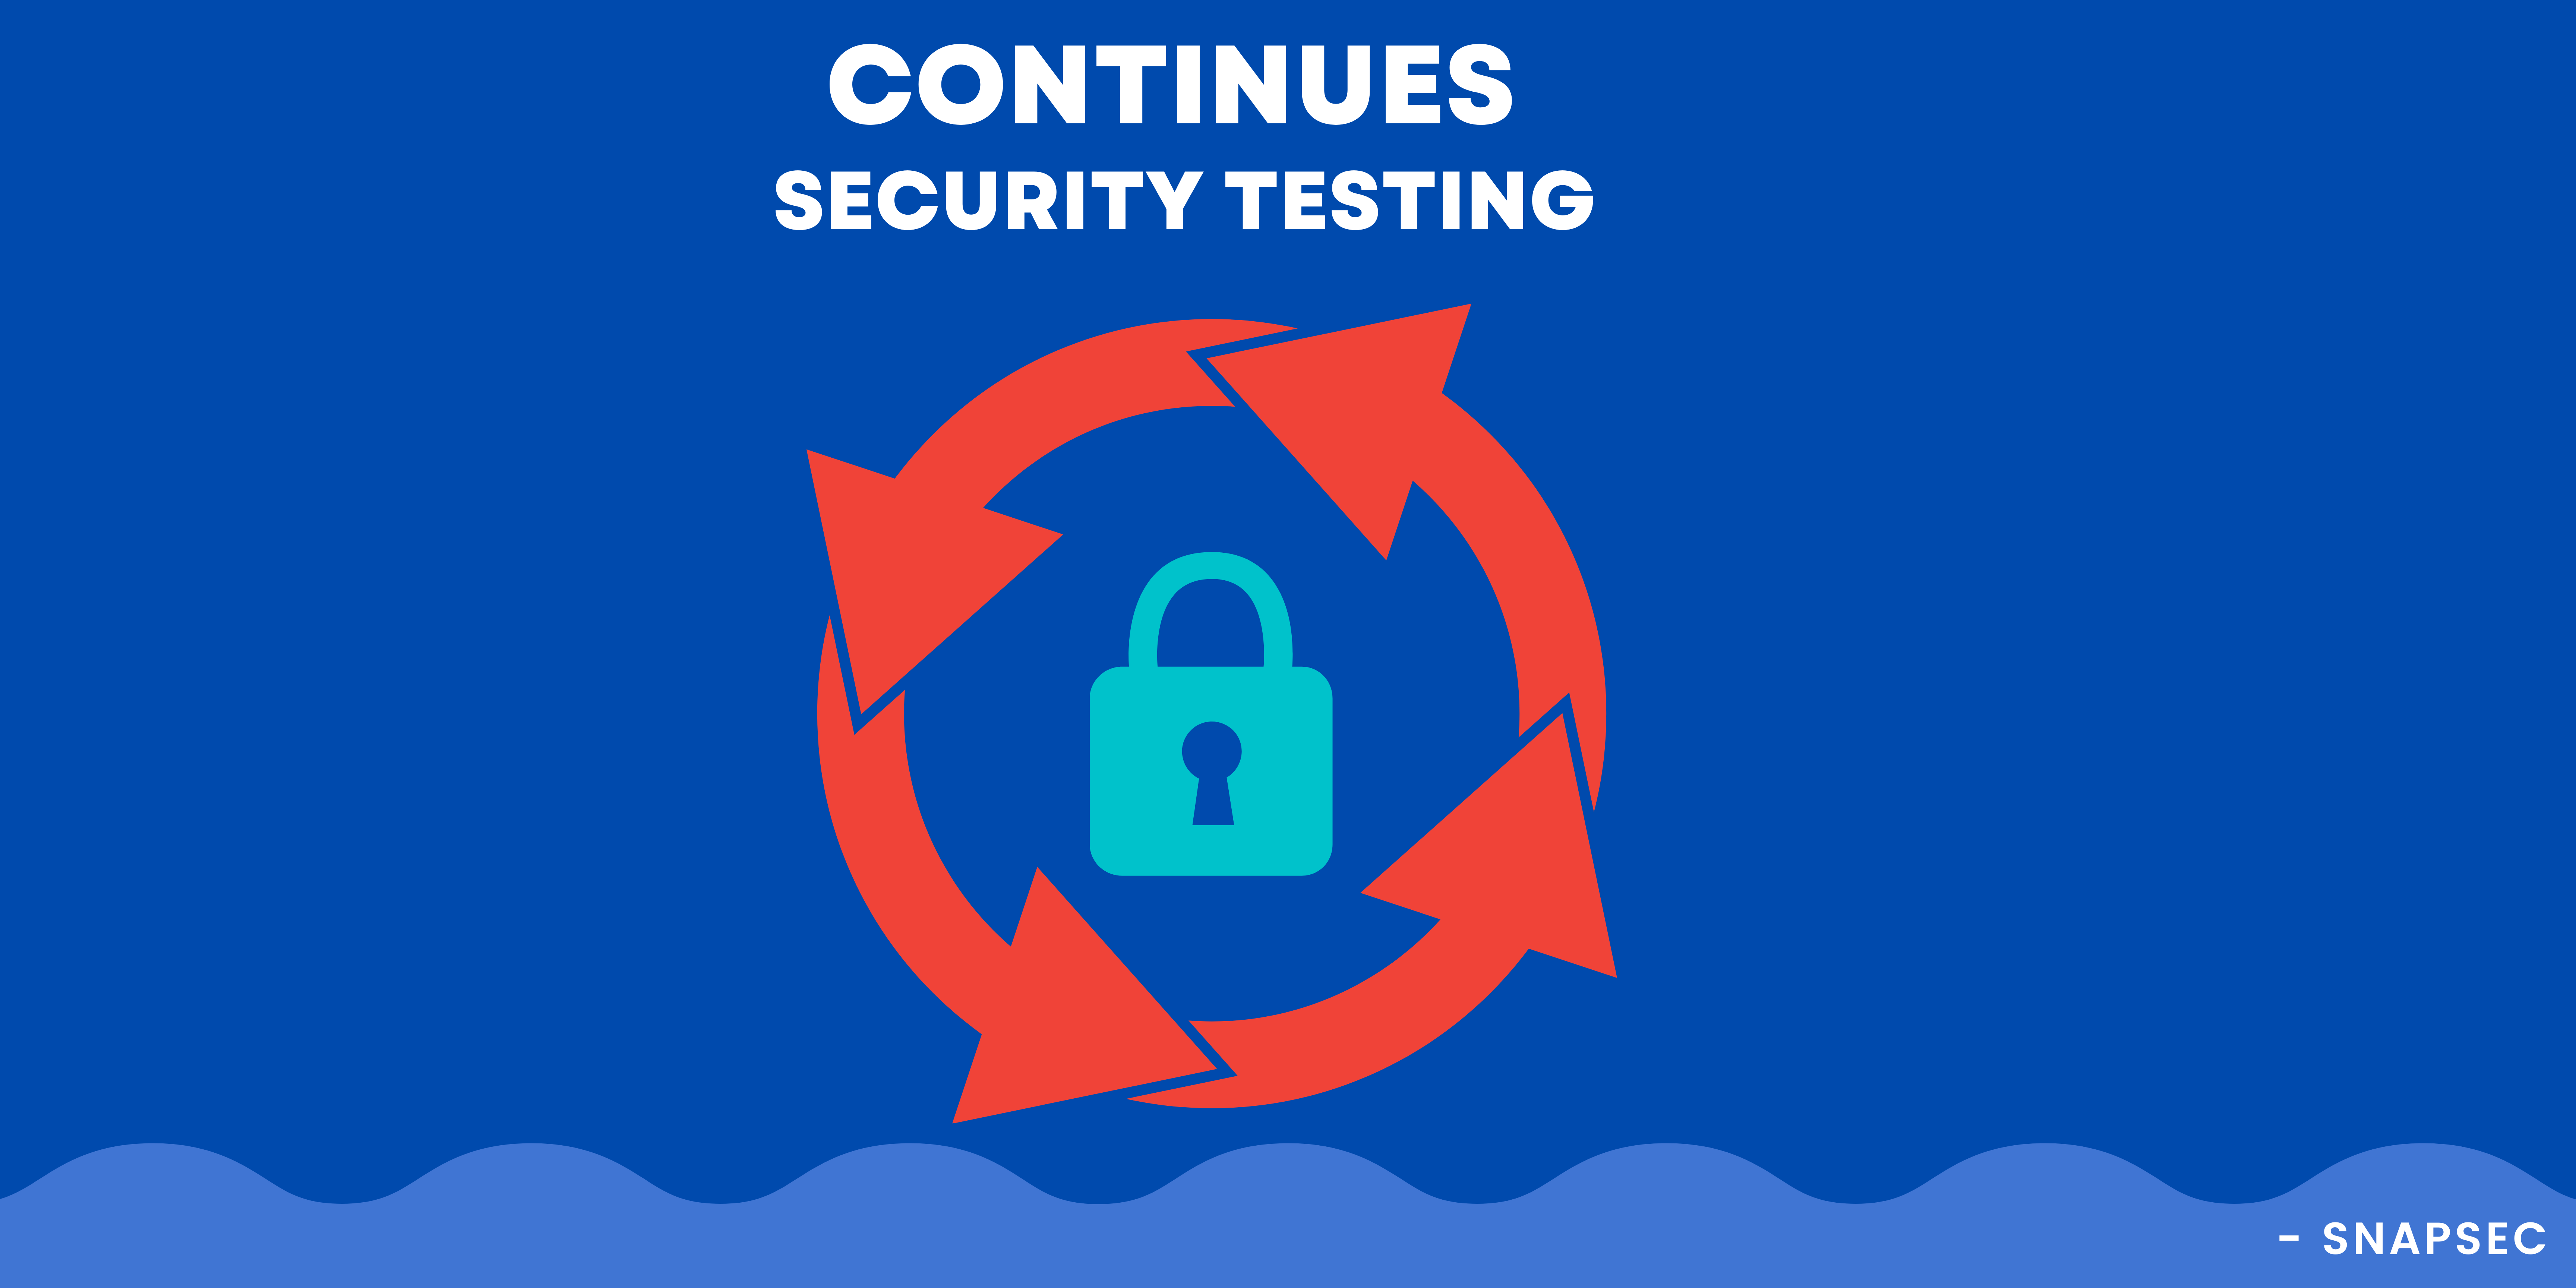 Continuous Security Testing - Snapsec